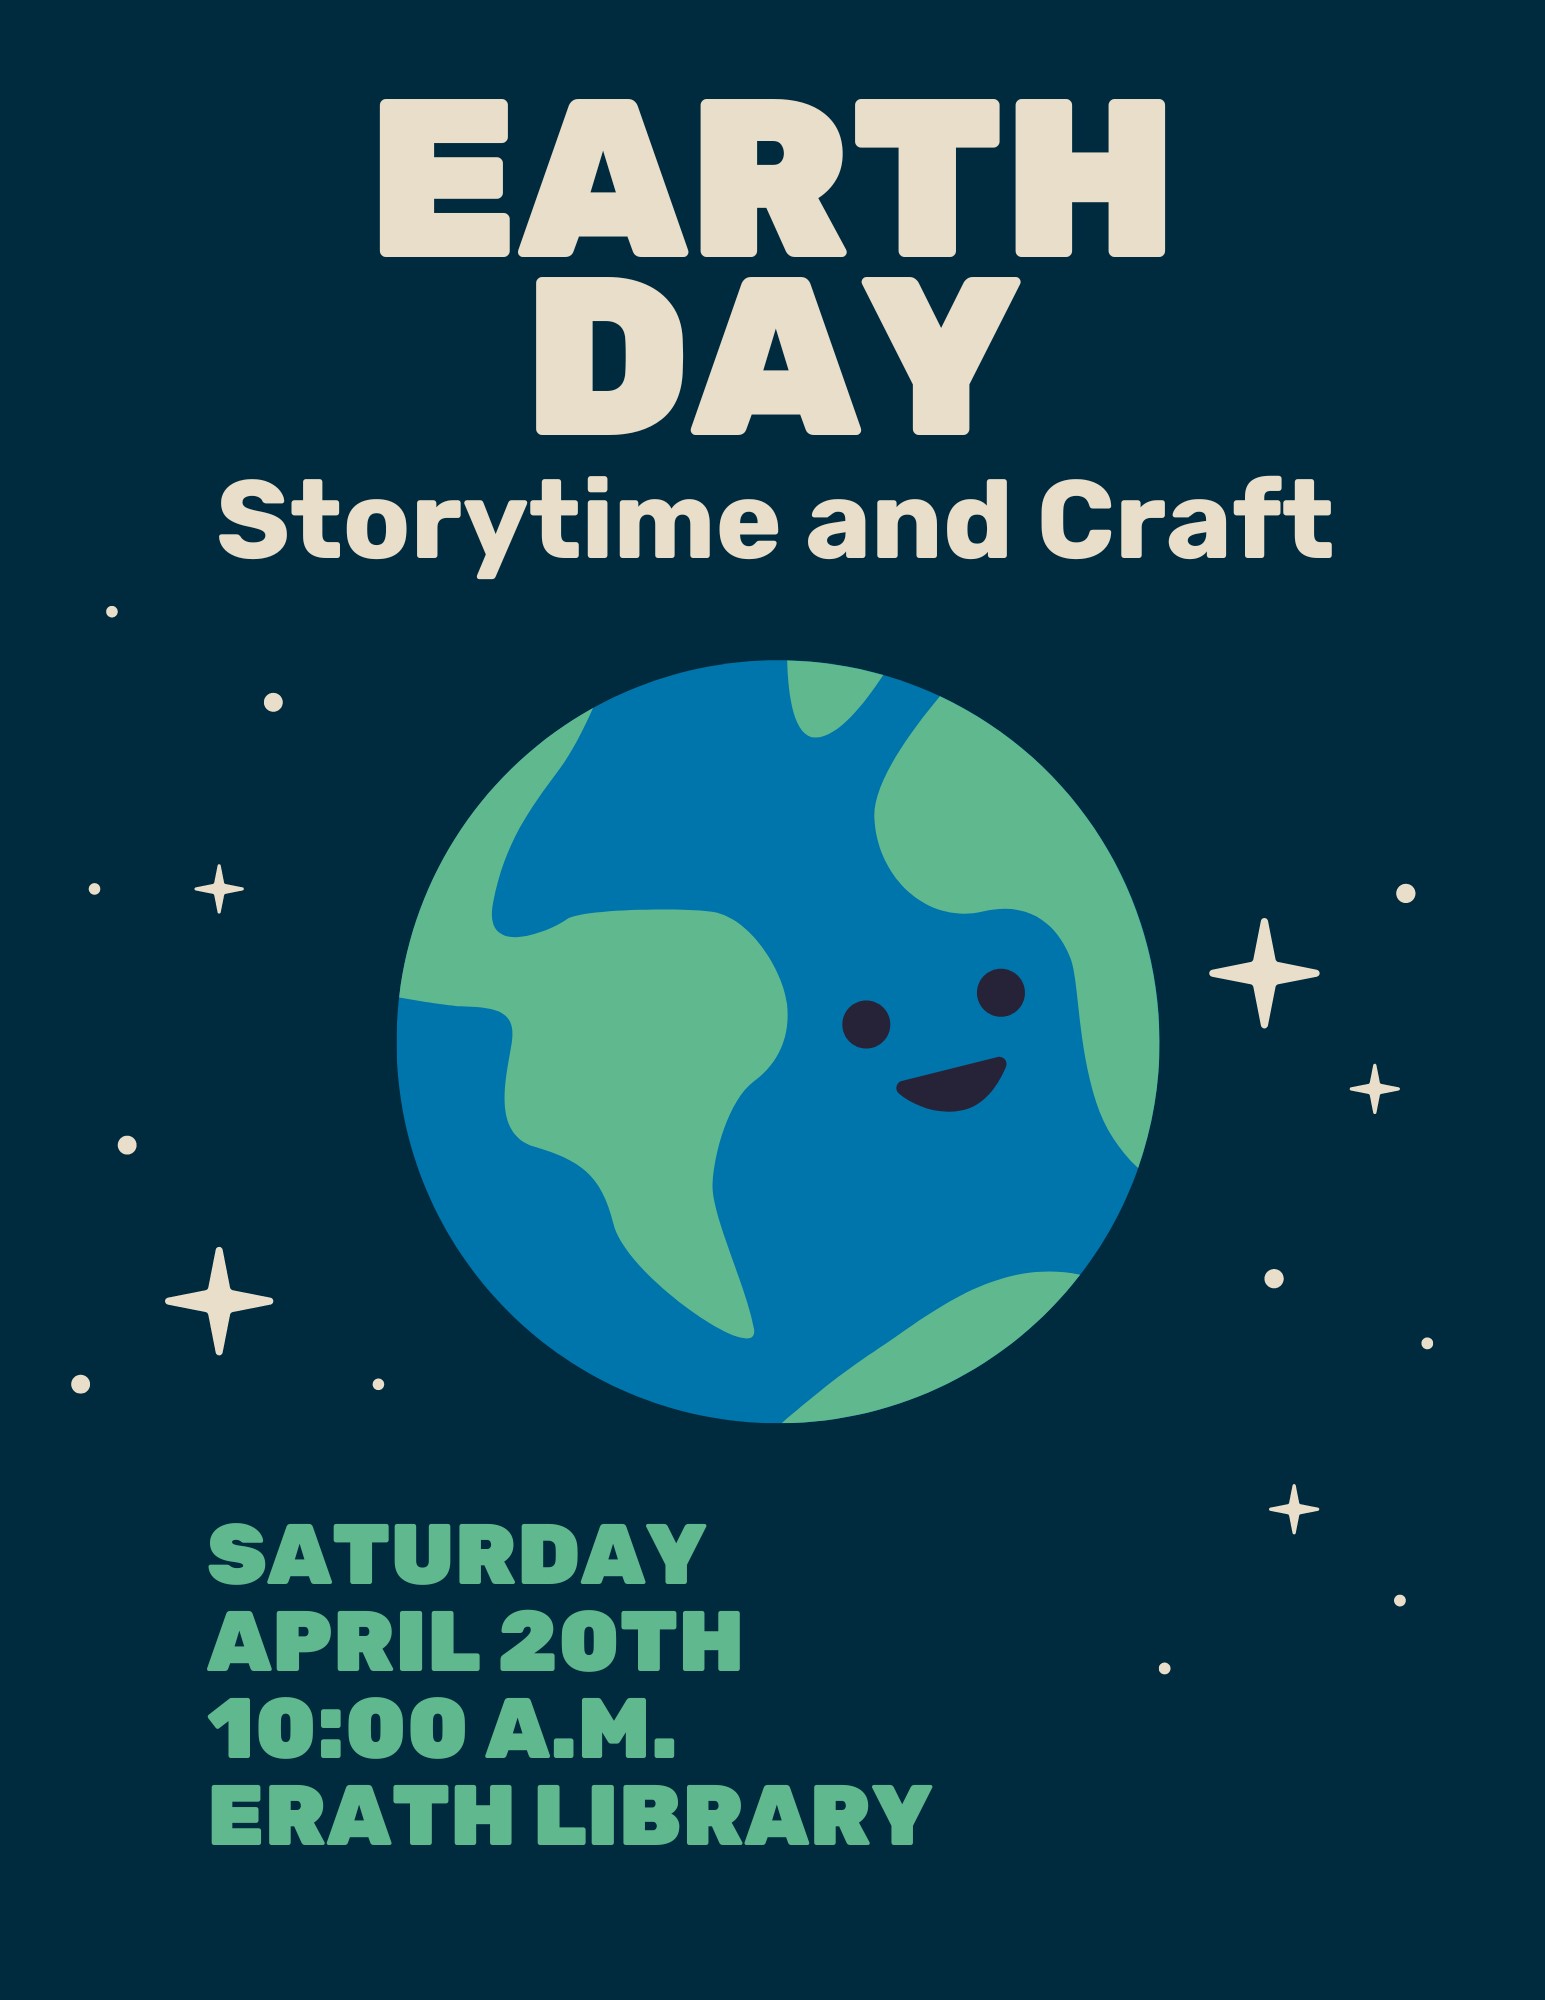 Earth Day Storytime and Craft–Erath